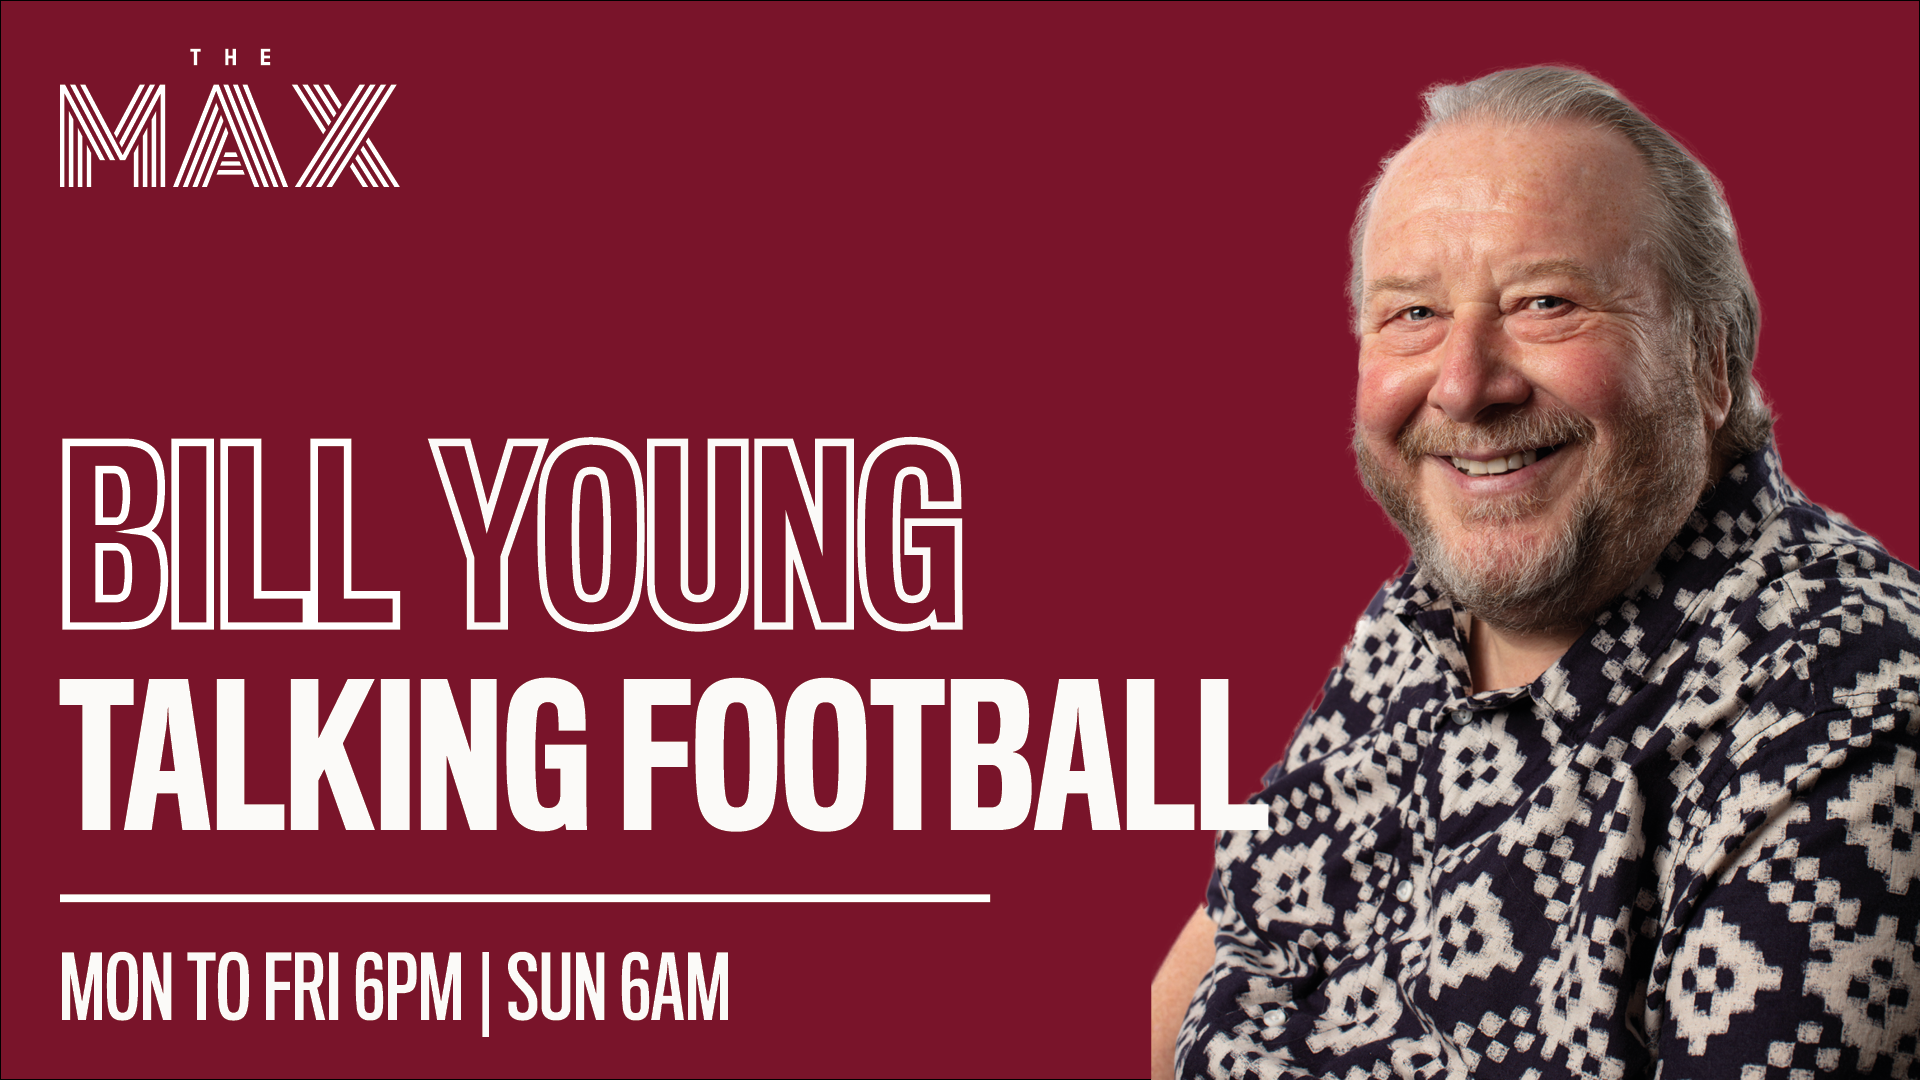 Talking Football with Bill Young Thursday 11th March